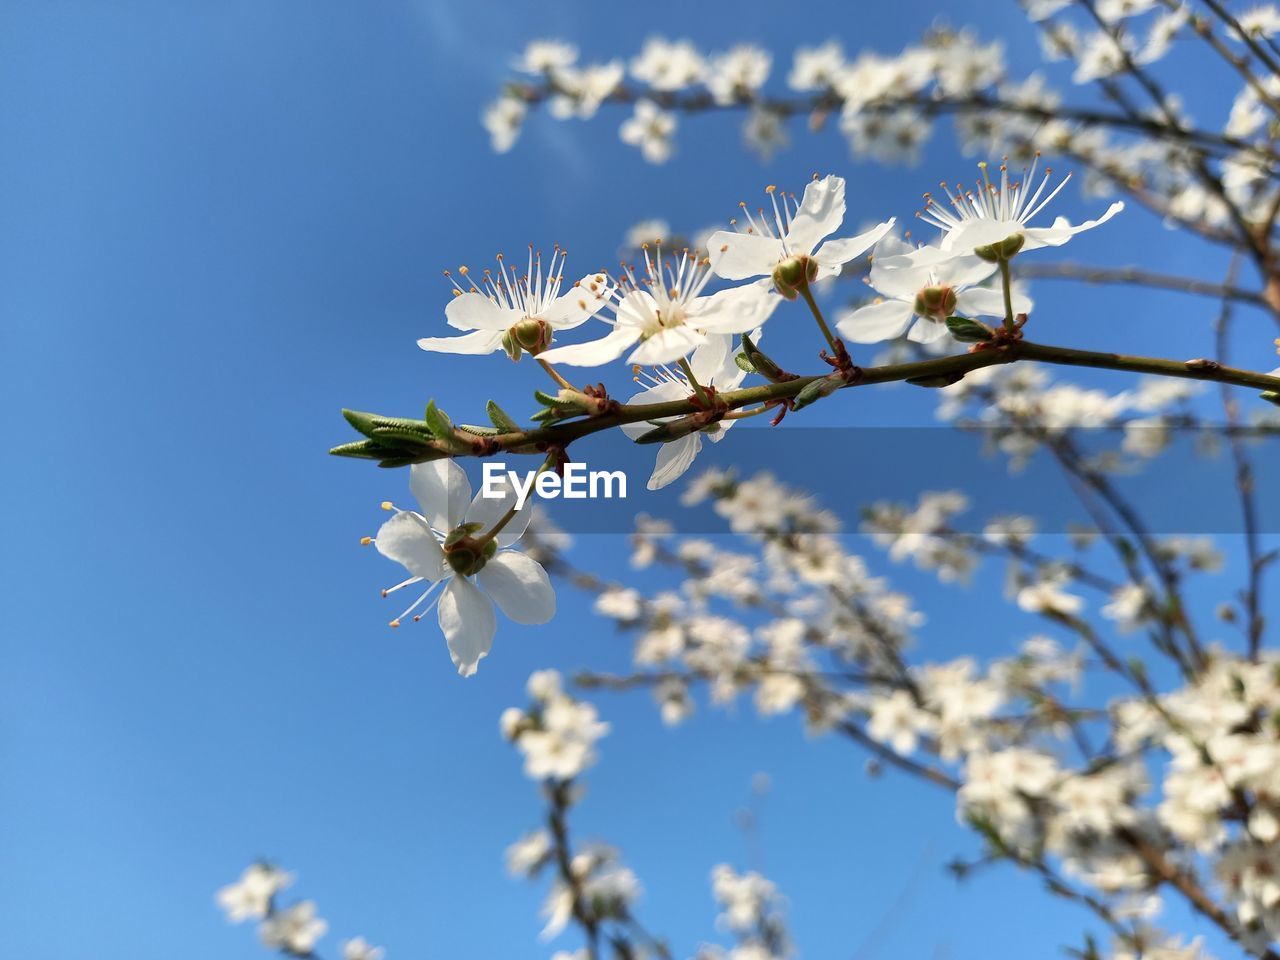 plant, flower, flowering plant, blossom, freshness, beauty in nature, fragility, tree, springtime, nature, branch, growth, sky, white, blue, spring, close-up, no people, flower head, focus on foreground, produce, clear sky, inflorescence, twig, low angle view, day, outdoors, fruit tree, botany, petal, cherry blossom, food, sunlight, sunny, food and drink, almond tree, selective focus, apple tree, agriculture